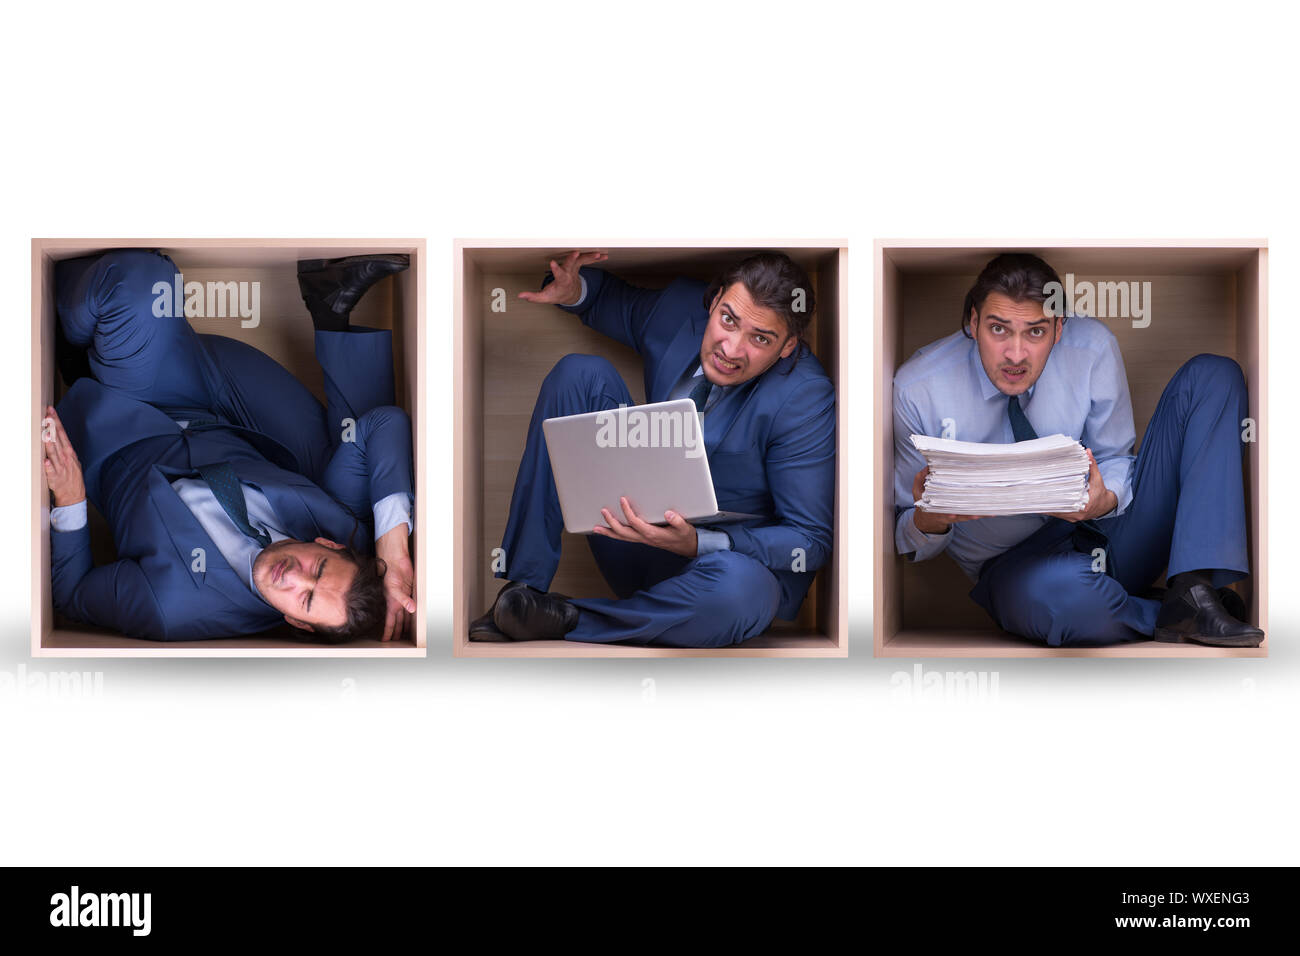 Employee working in tight space Stock Photo